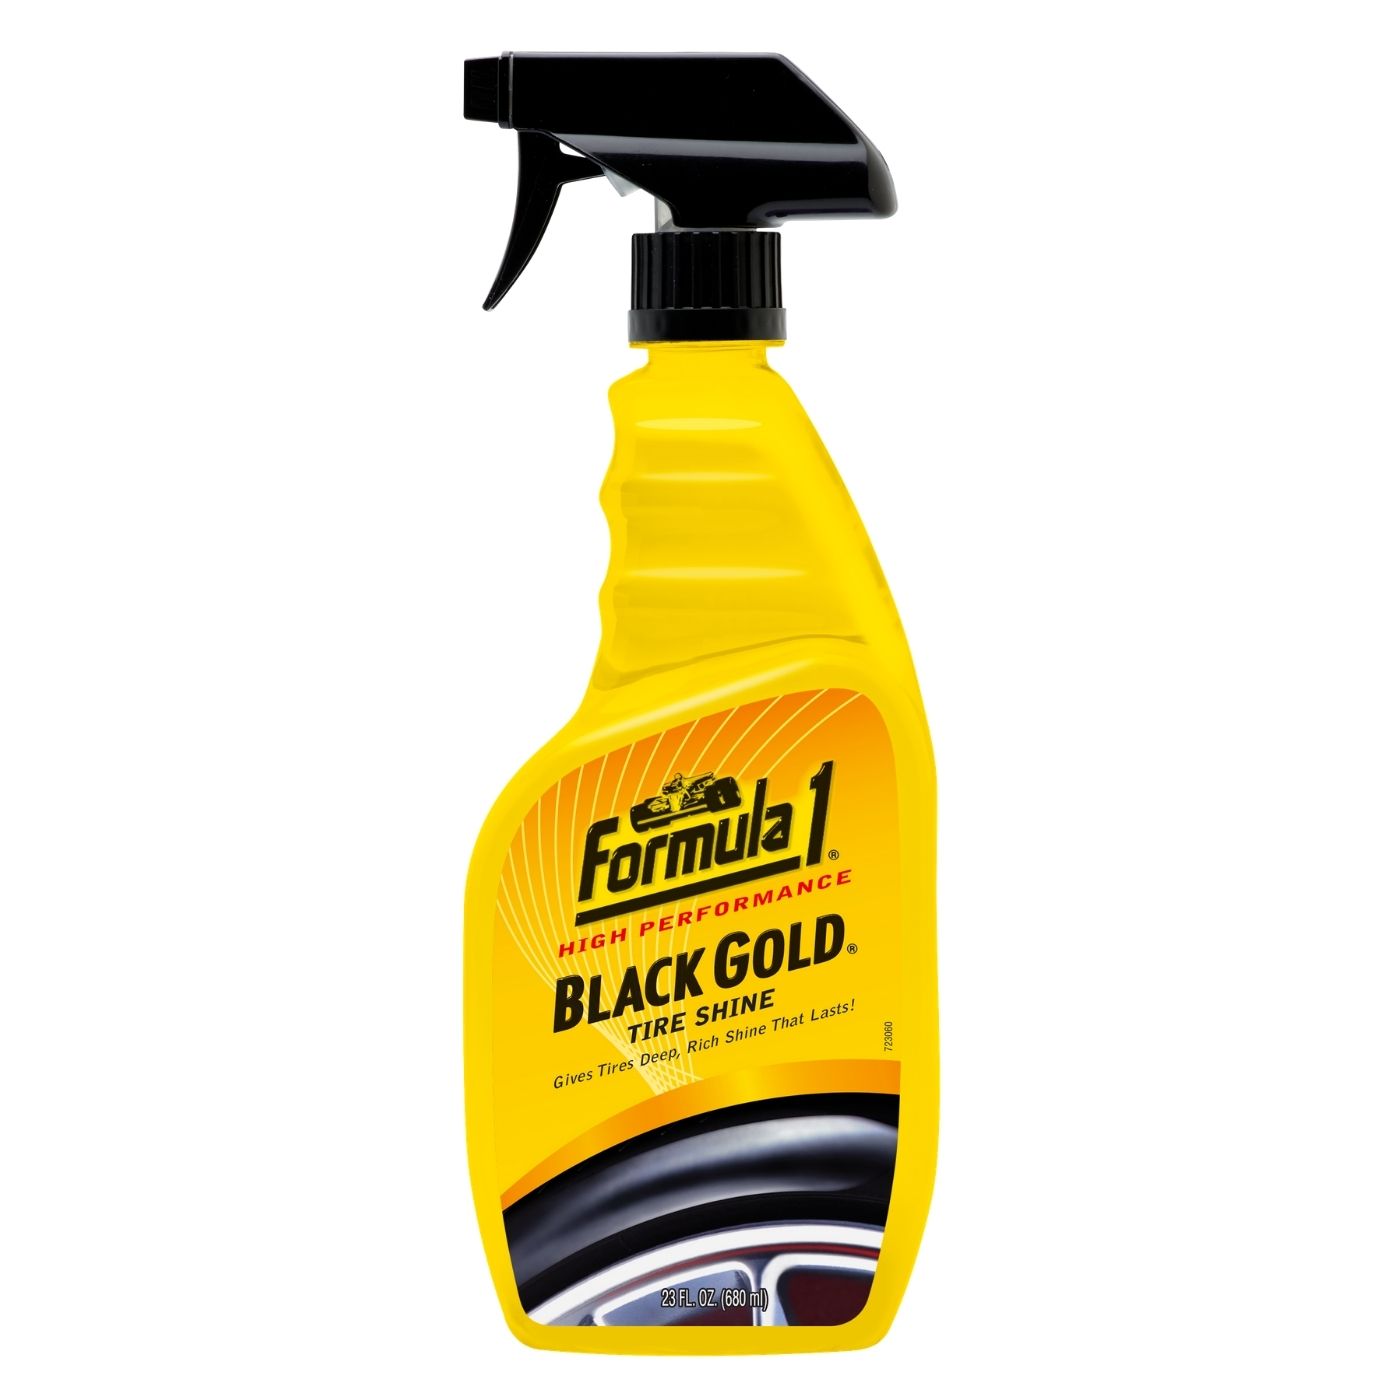 New FORMULA 1 Black Gold Give Tire Deep Rich Shine That Lasts - 680ml 615258